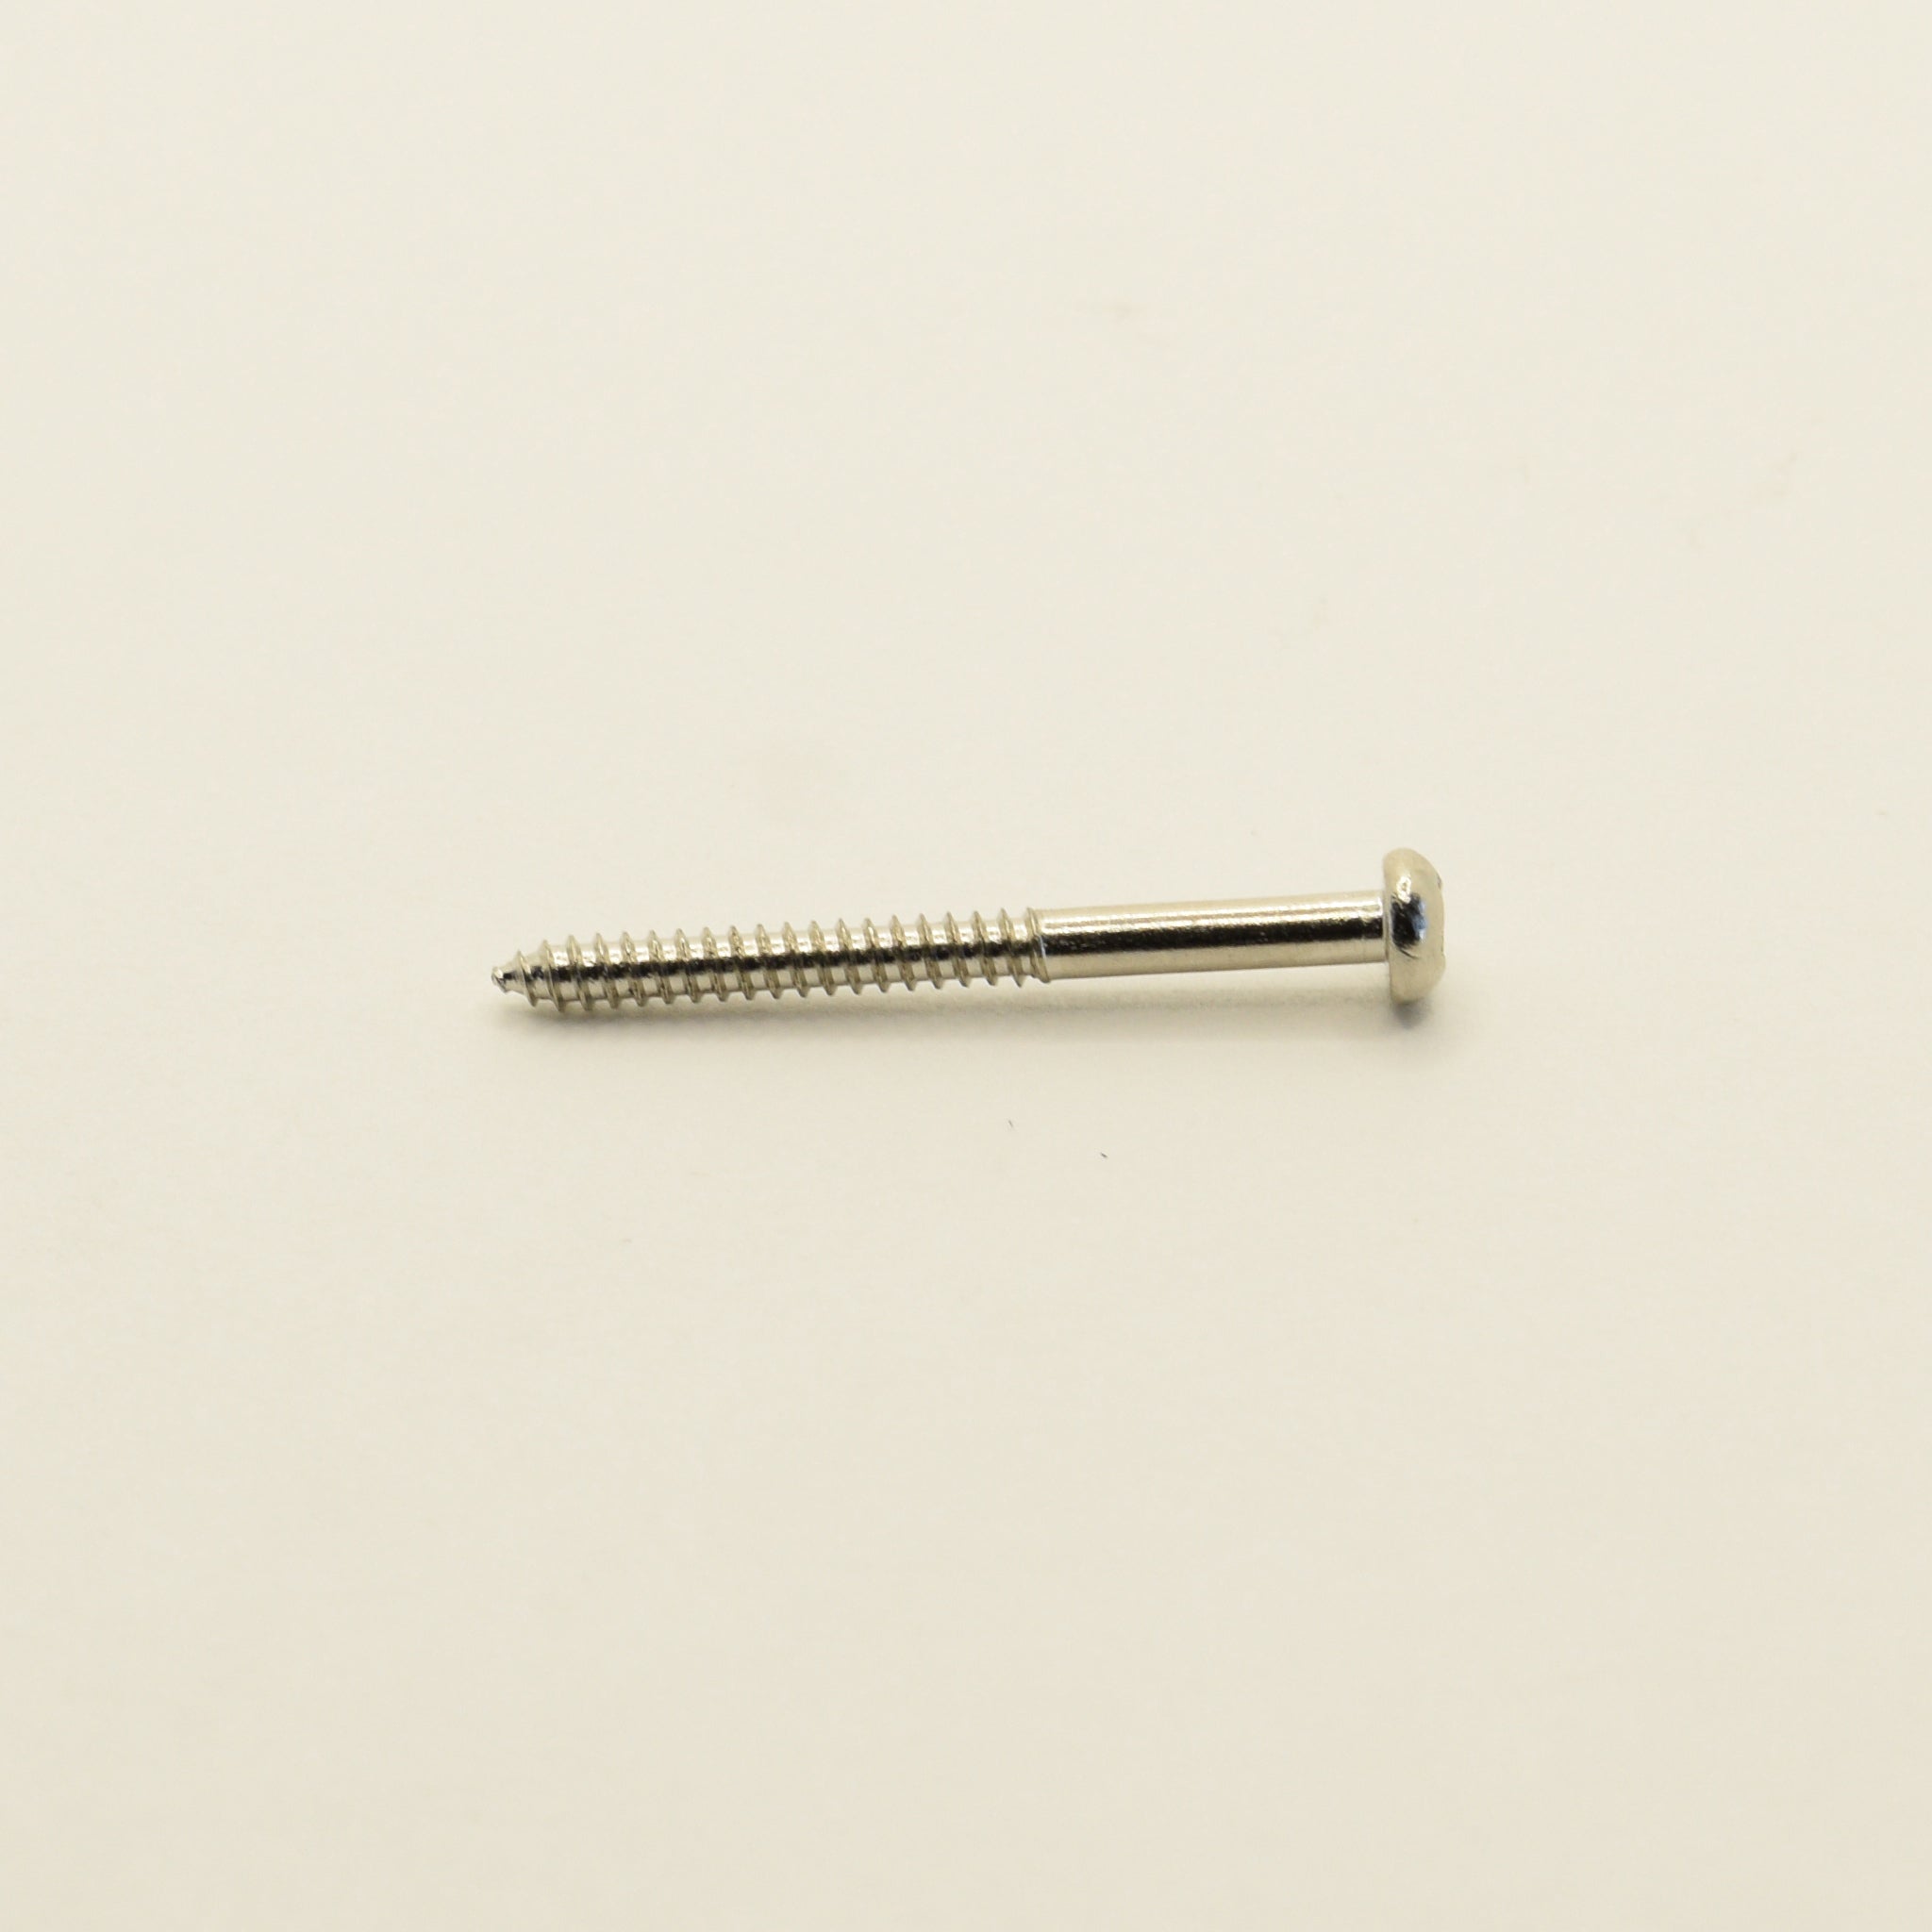 Chrome Steel P-90 and Bass Pickup Mounting Screws 2.5mm x 32mm